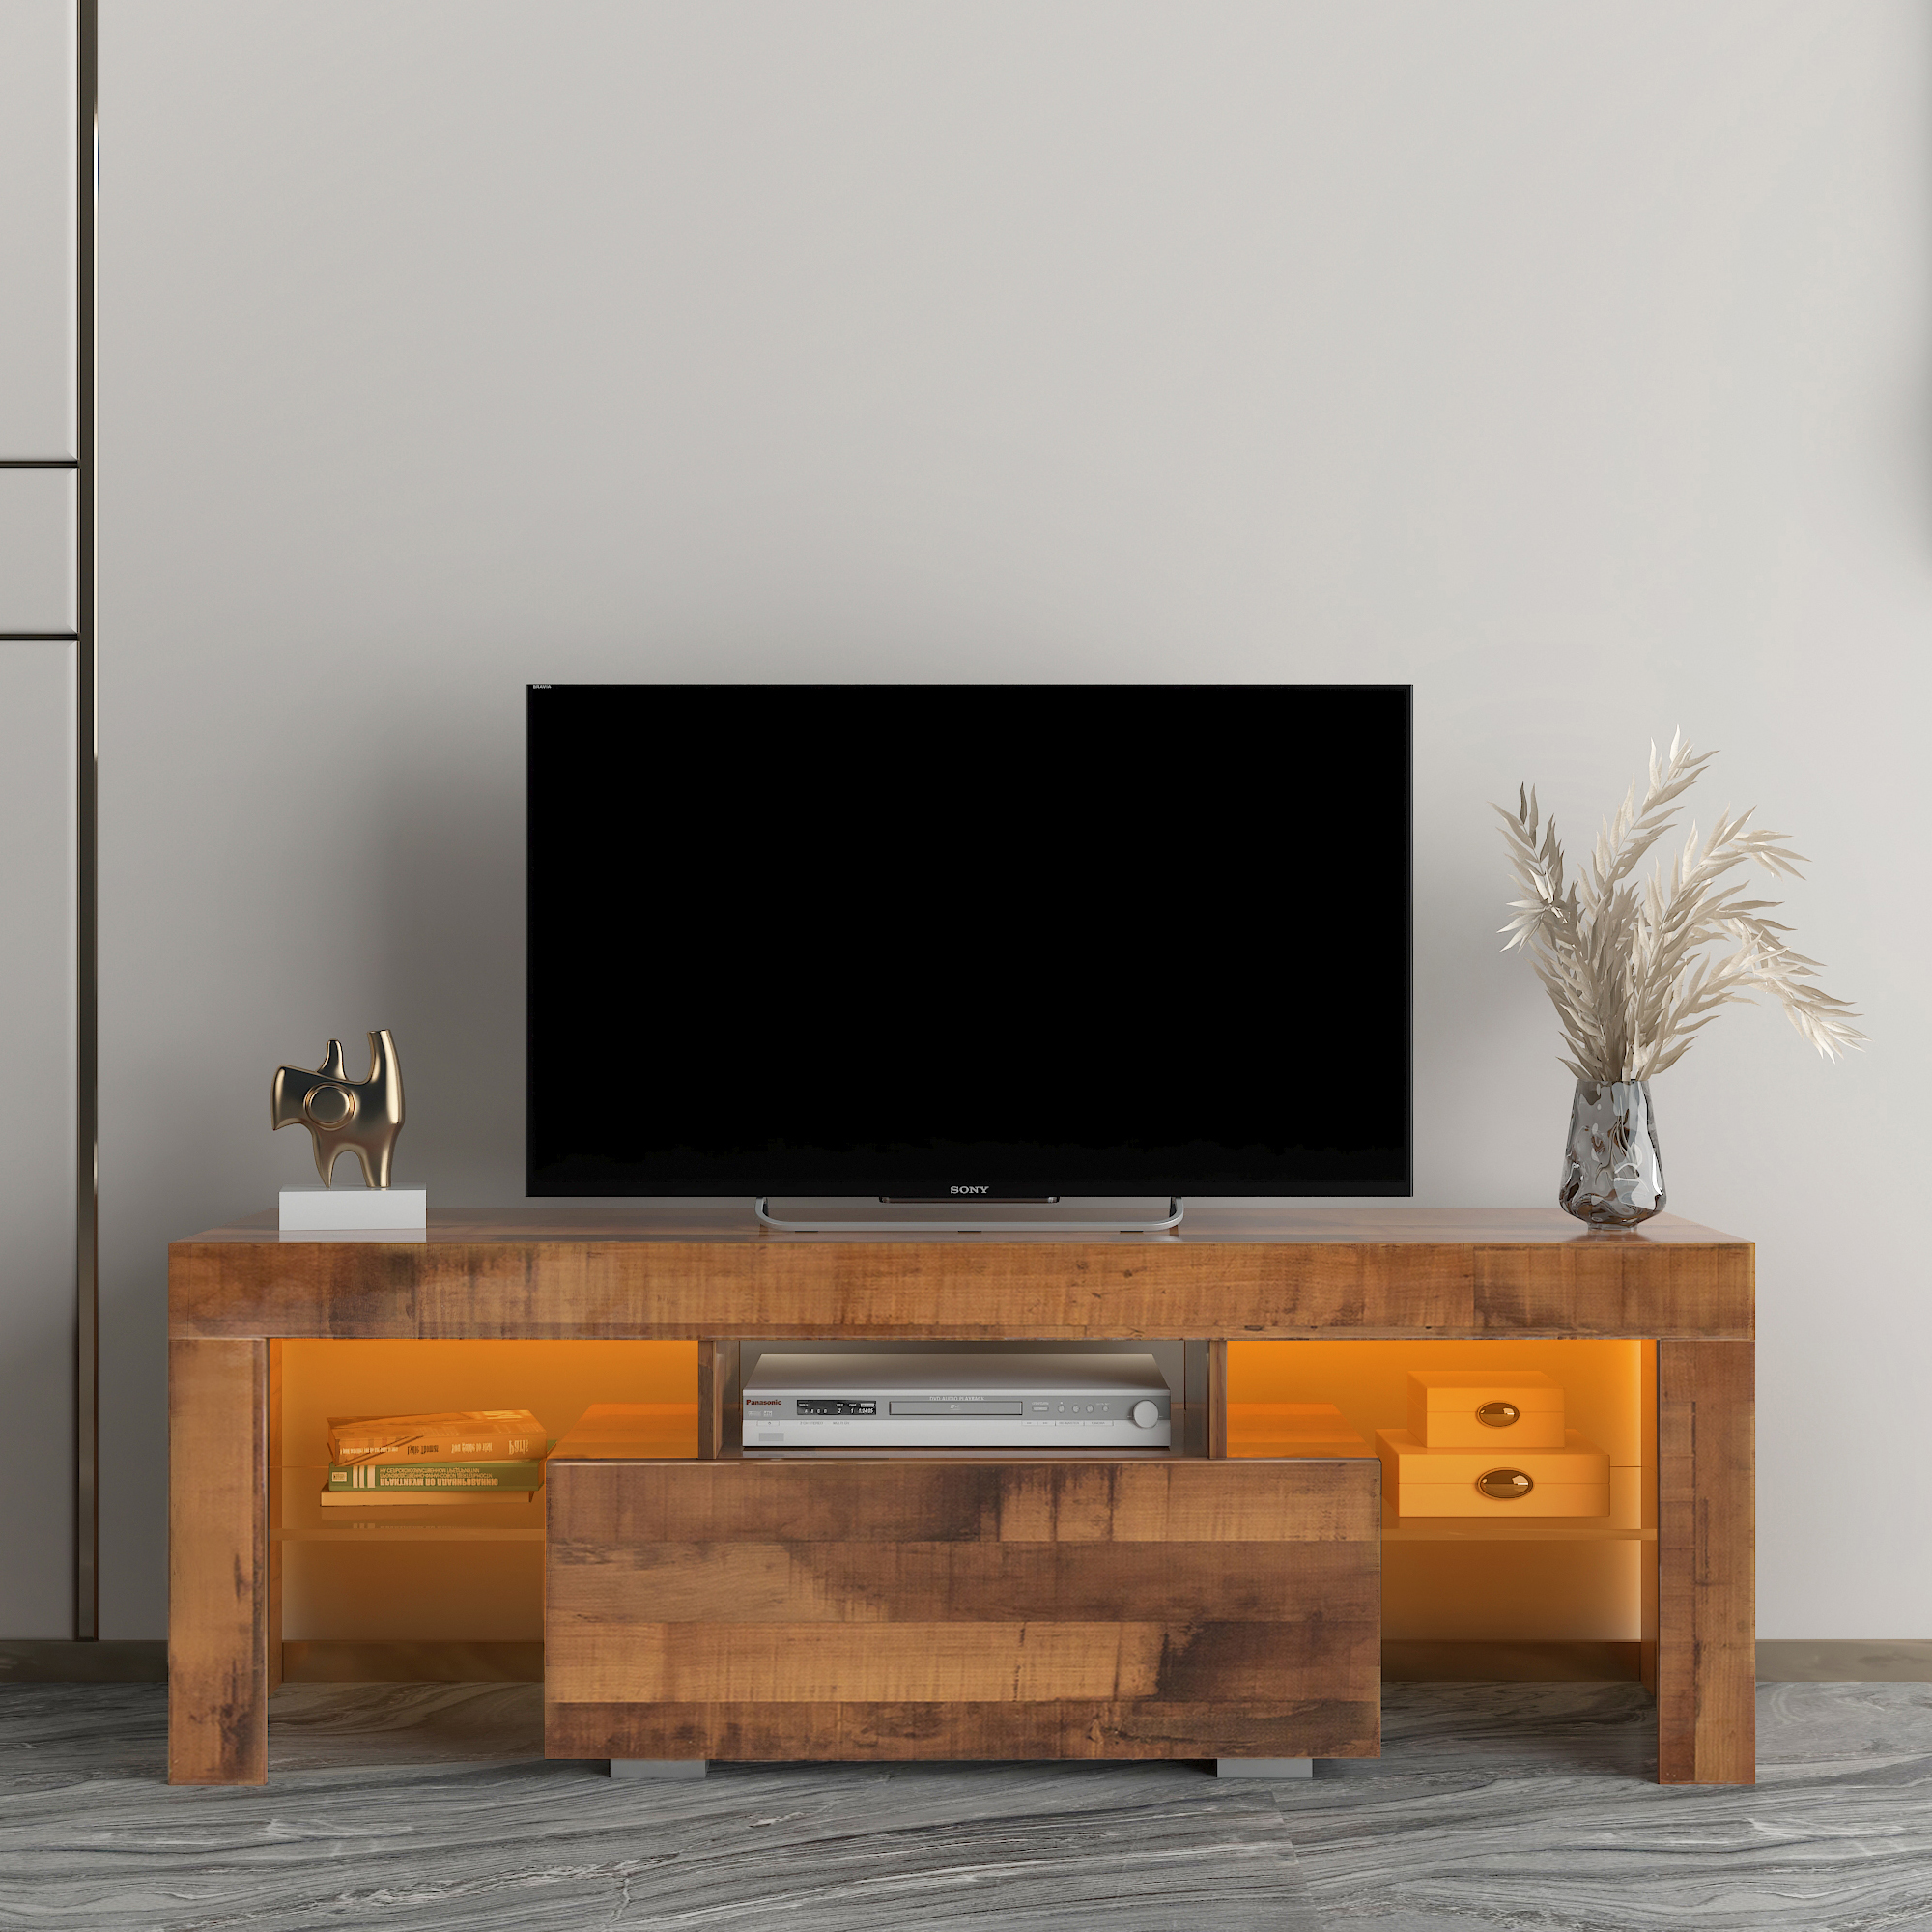 TV Stand with LED RGB Lights,Flat Screen TV Cabinet, Gaming Consoles - in Lounge Room, Living Room and Bedroom,WALNUT-Boyel Living